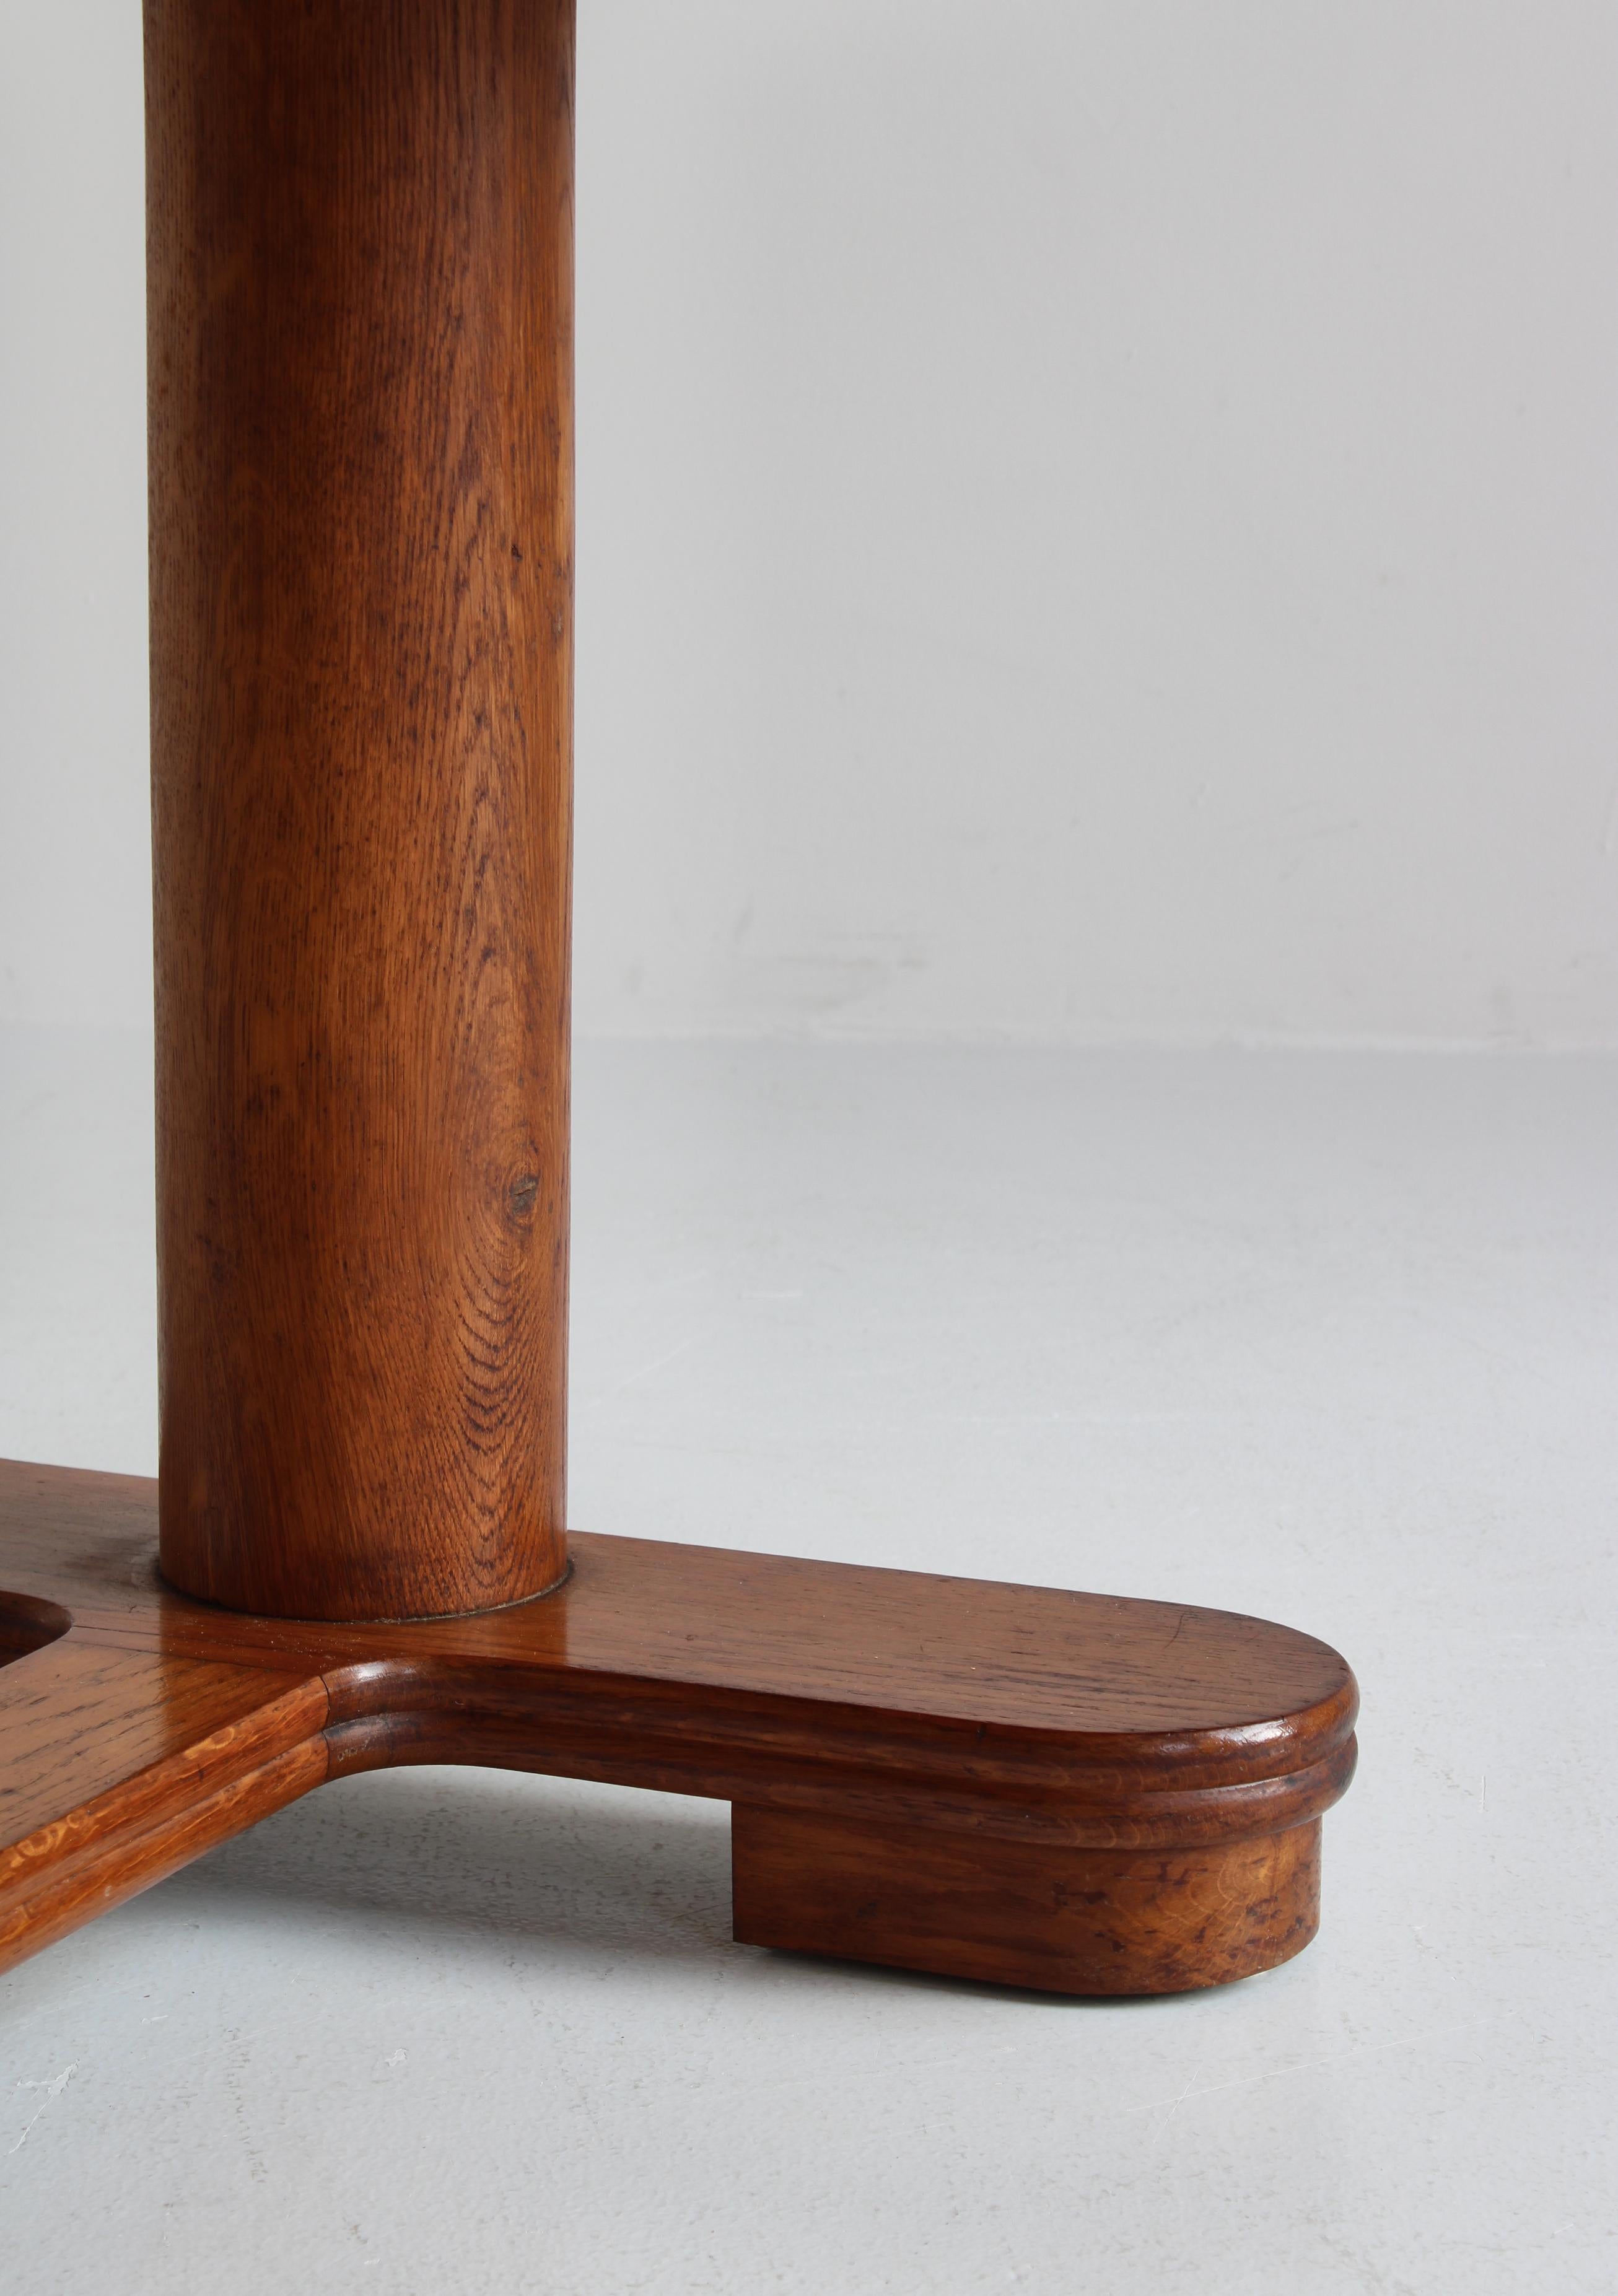 Art Deco Table by Danish Cabinetmaker in Patinated Oak, 1930s For Sale 13